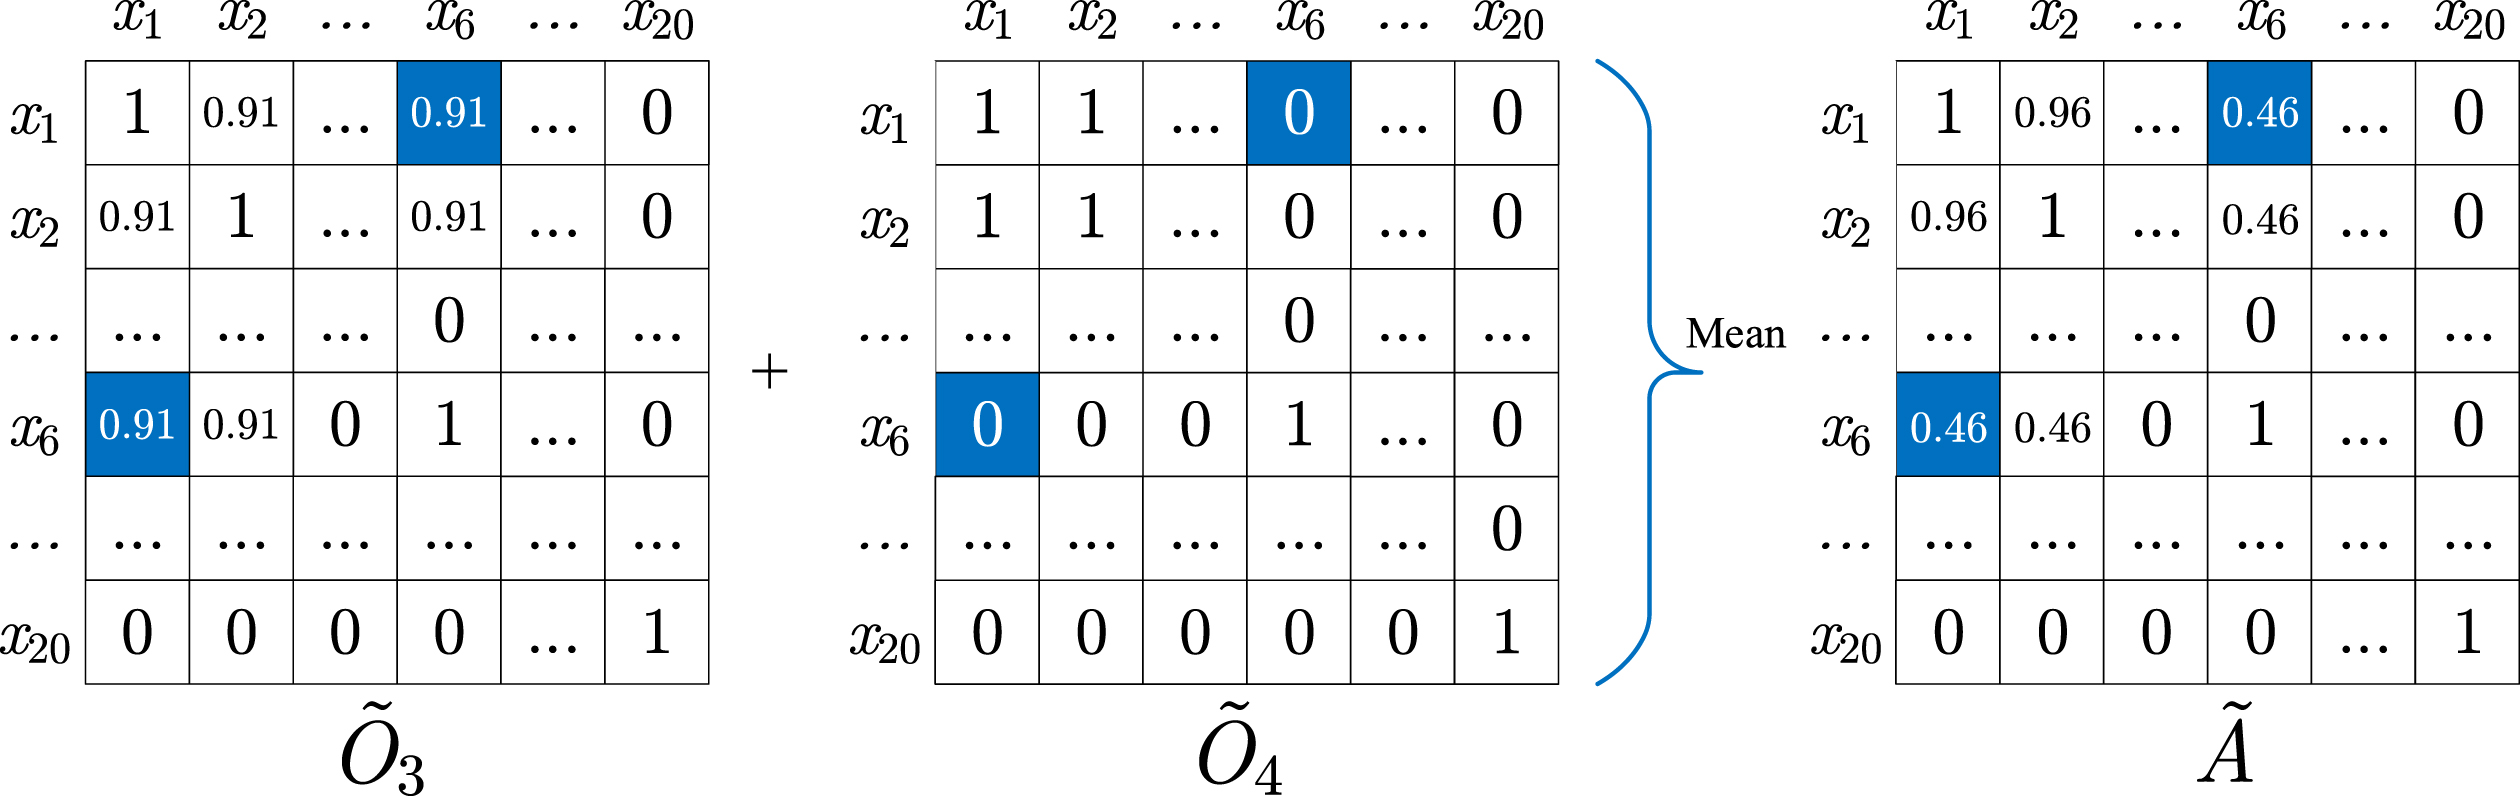 Redefined Matrices 
O˜3
, 
O˜4
 and 
A˜
 of the example in Fig. 4.